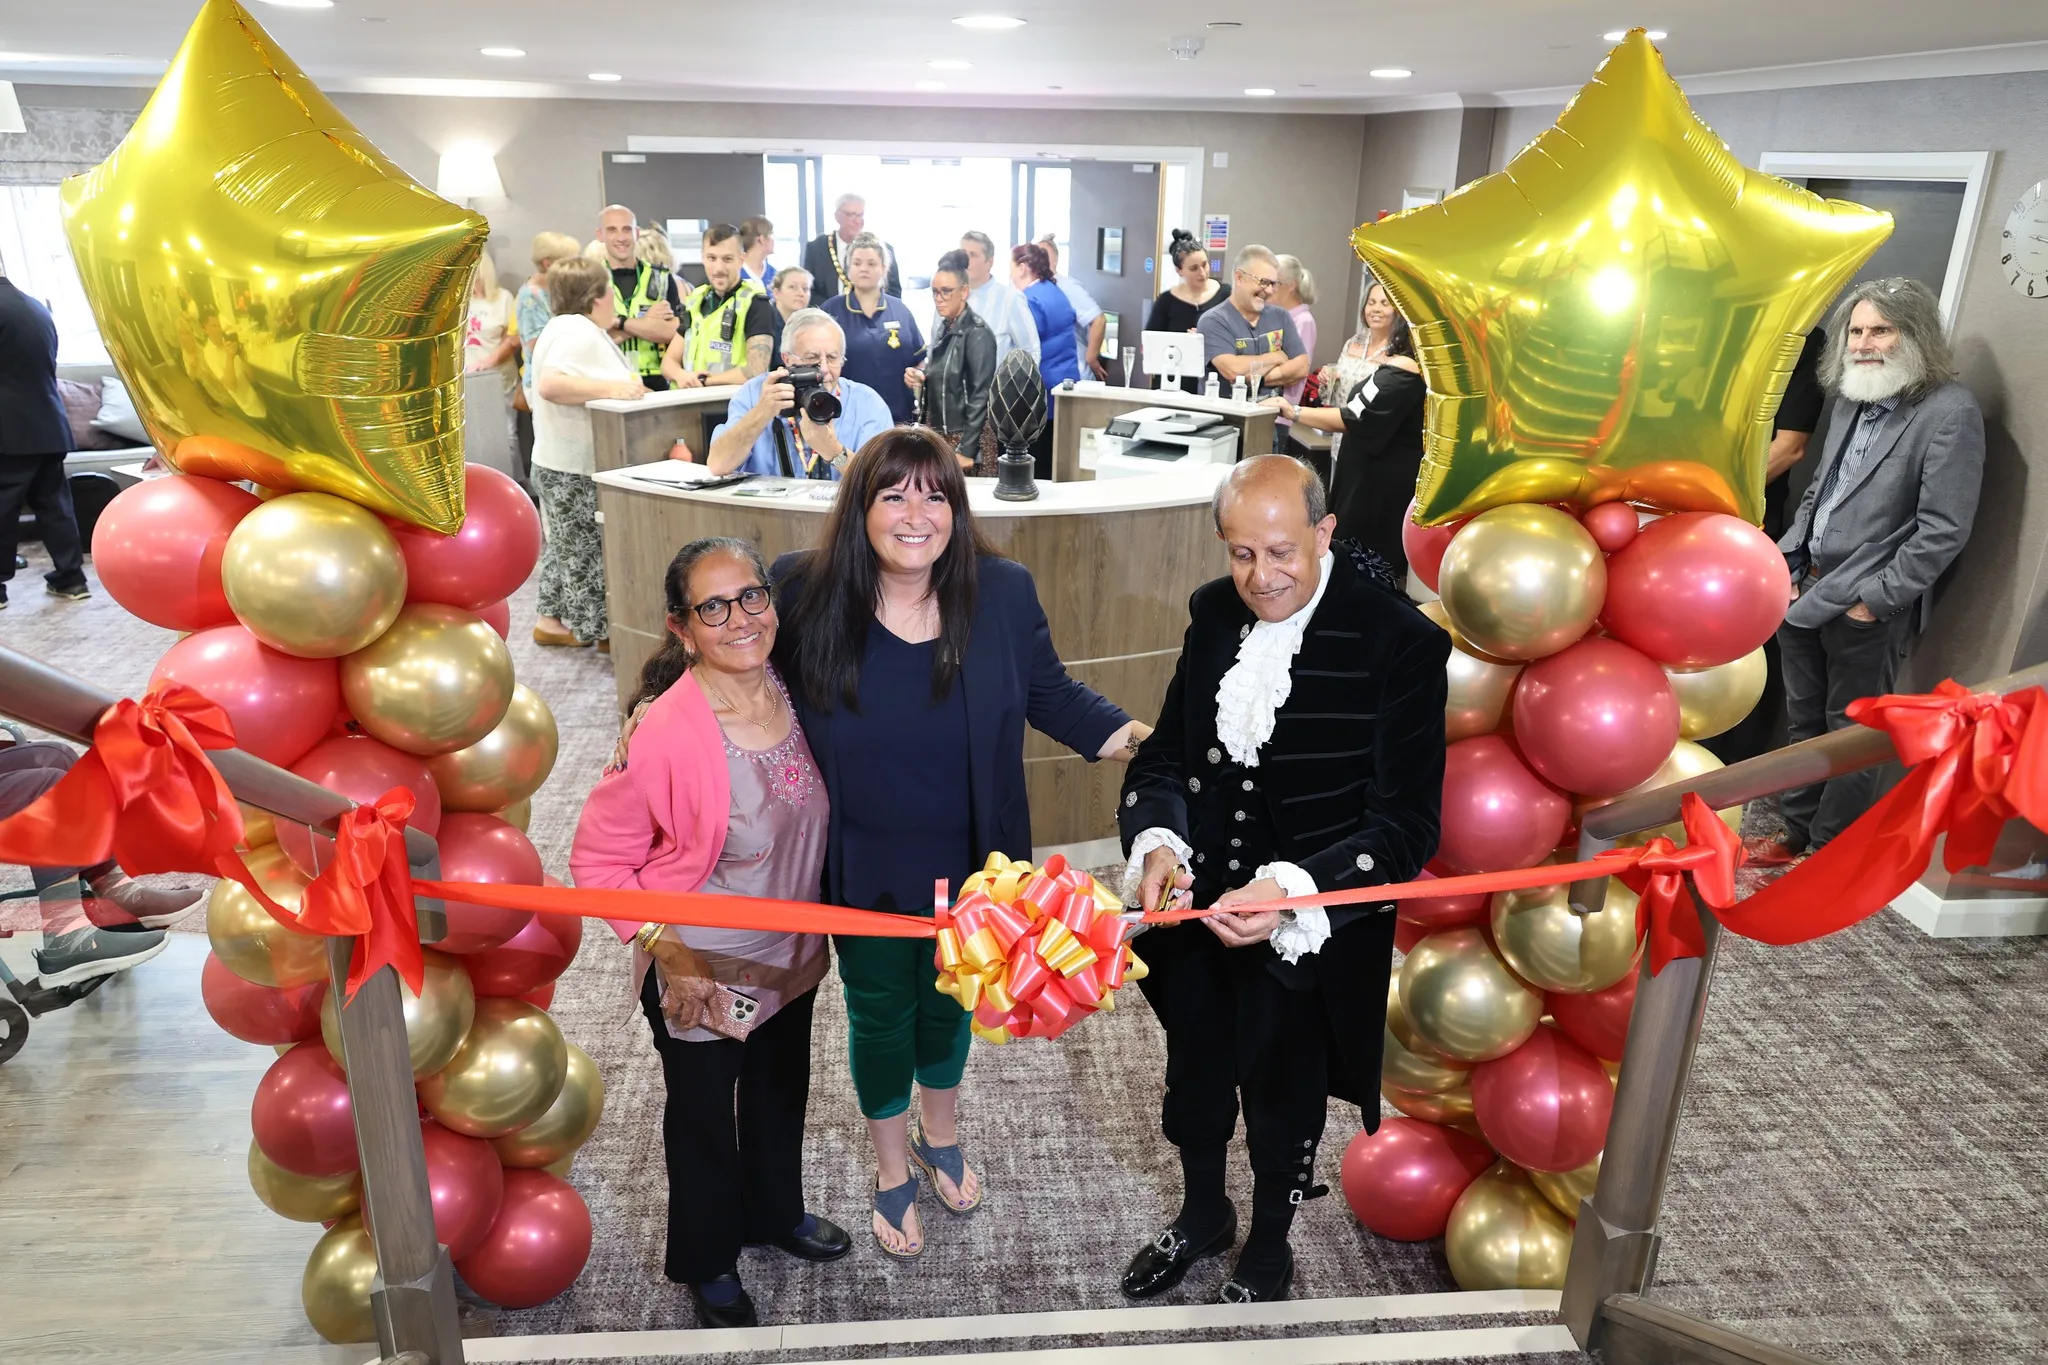 Barton Manor was officially opened by the High Sheriff of Cambridgeshire, Dr Bharat Khetani.